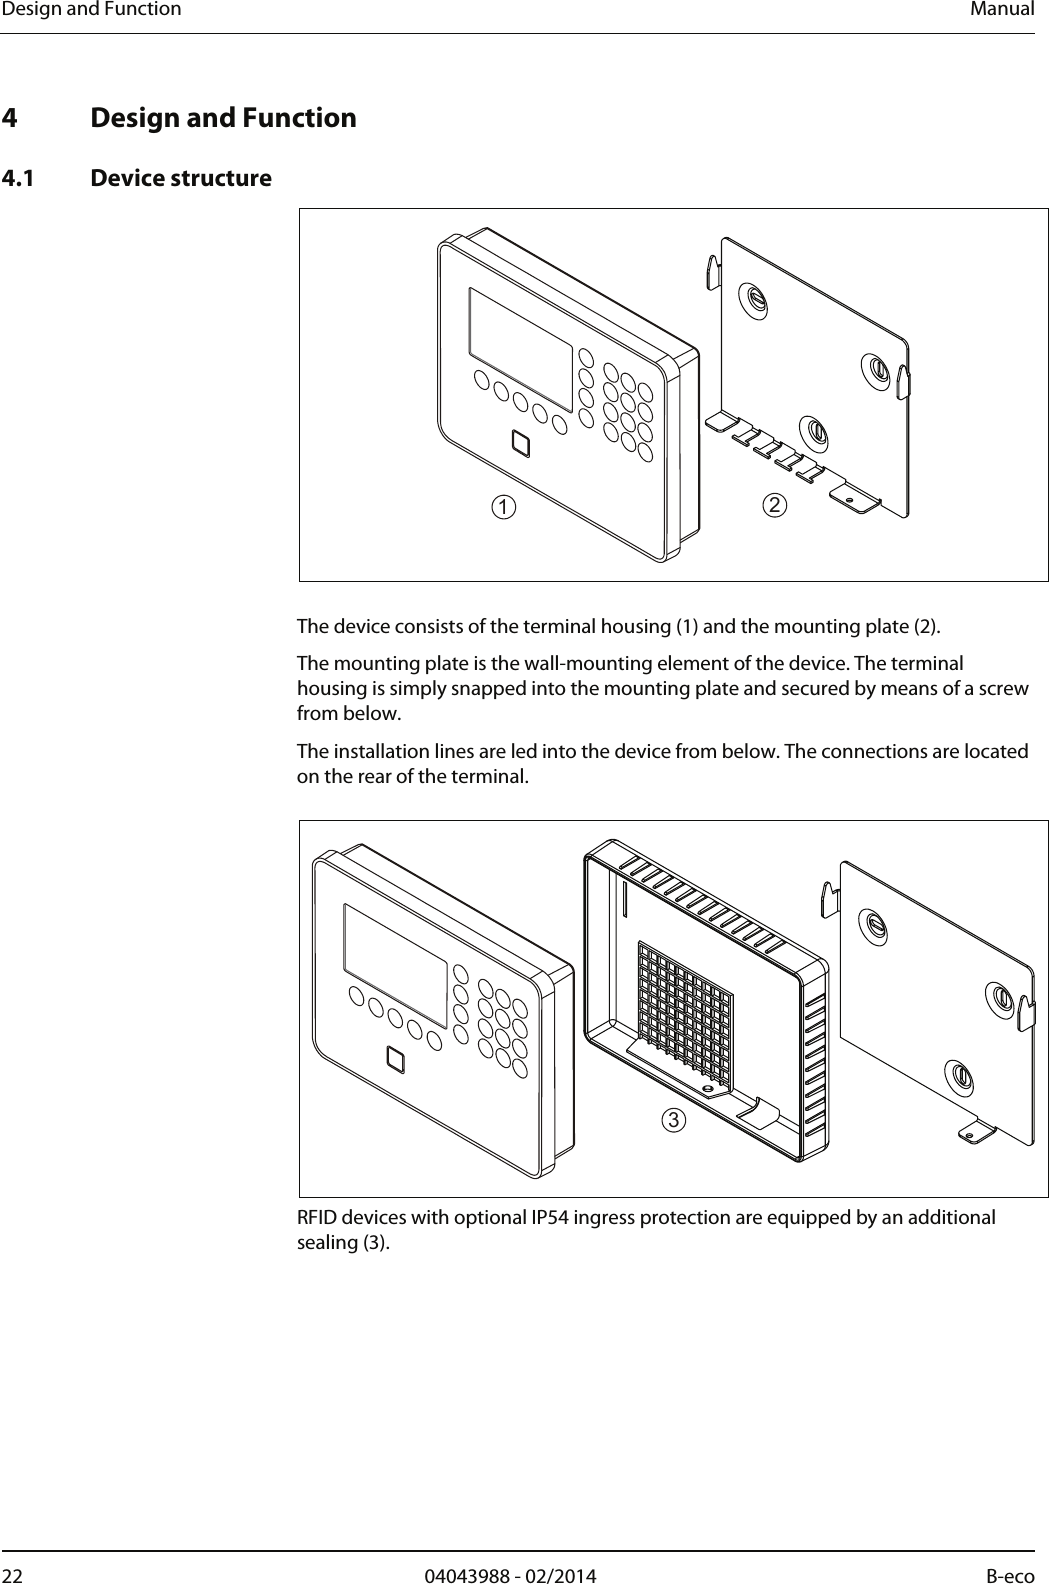 Design and Function  Manual 22  04043988 - 02/2014  B-eco   4 Design and Function  4.1 Device structure   12  The device consists of the terminal housing (1) and the mounting plate (2). The mounting plate is the wall-mounting element of the device. The terminal housing is simply snapped into the mounting plate and secured by means of a screw from below. The installation lines are led into the device from below. The connections are located on the rear of the terminal.  3 RFID devices with optional IP54 ingress protection are equipped by an additional sealing (3). 